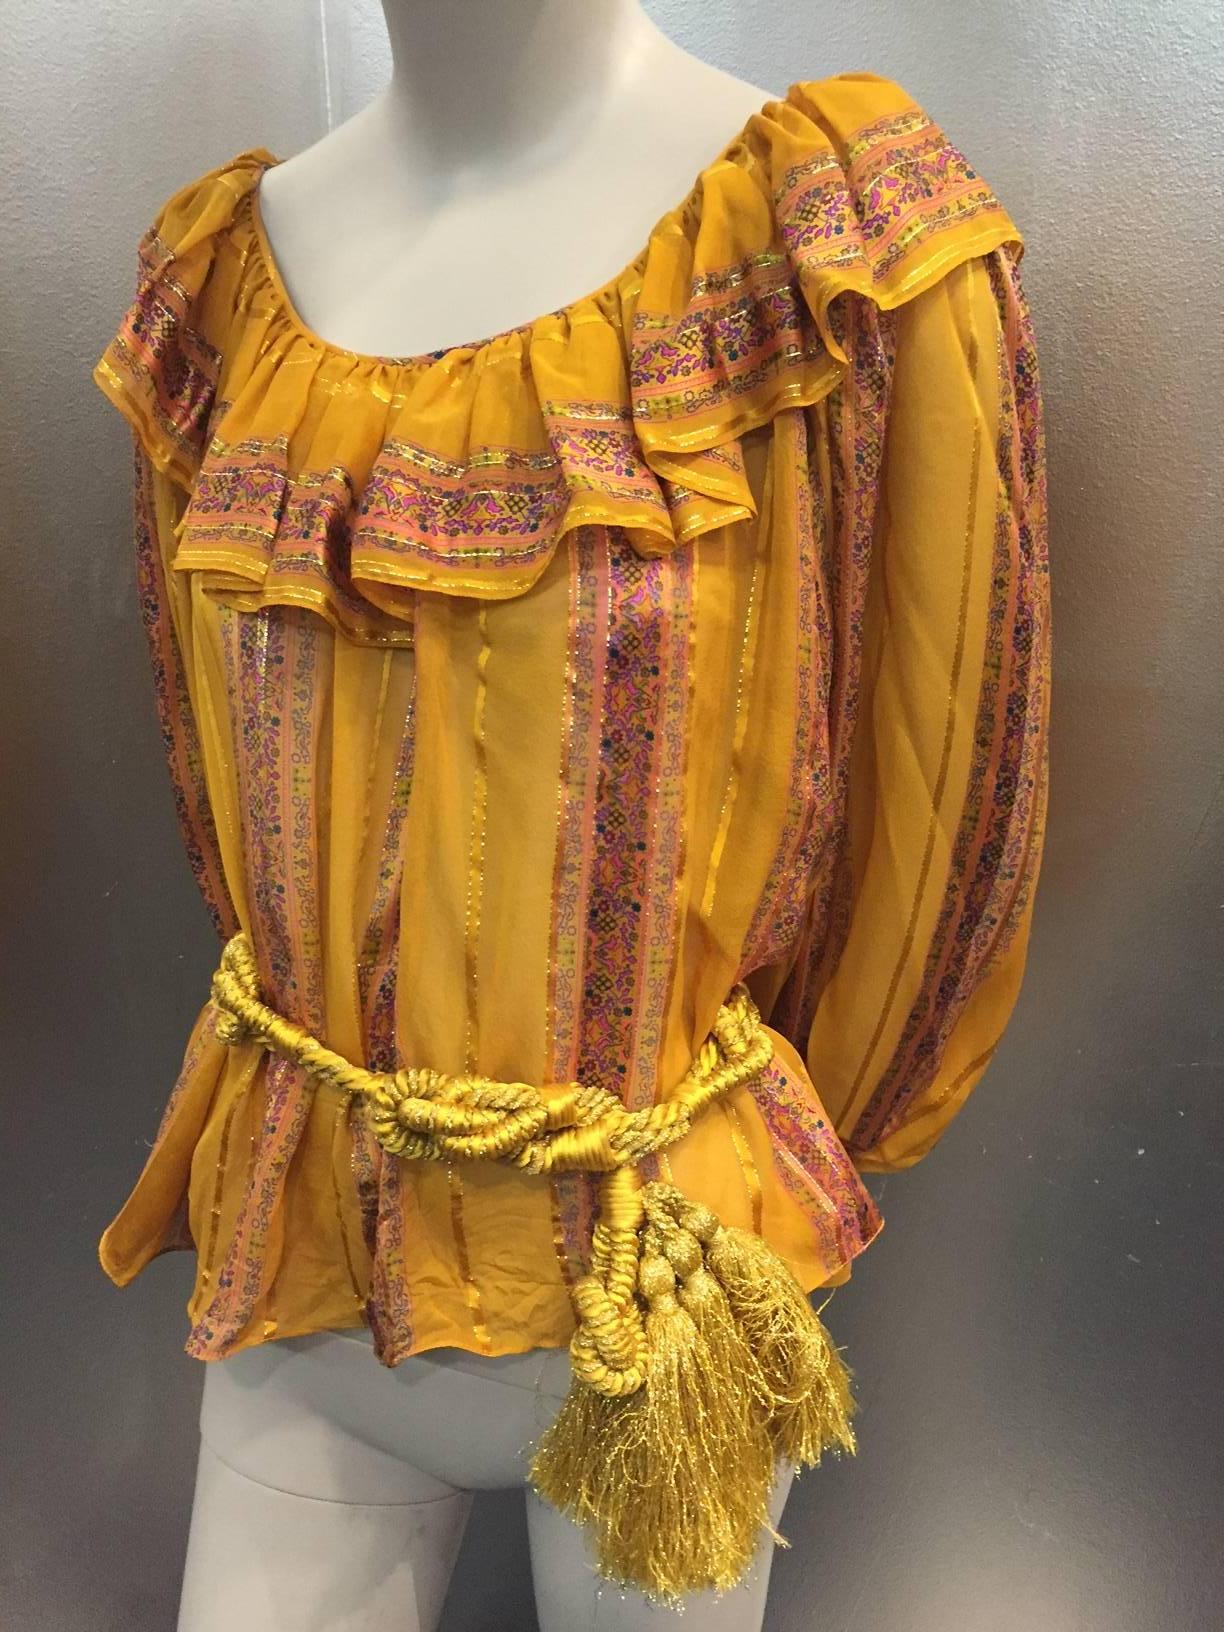 A gorgeous 1970s peasant blouse, no label Oscar de la Renta :  Elastic gathered cuffs and ruffled neckline in semi-sheer silk crepe with floral satin and lamé stripes. Original gold lamé knotted and tasseled cord belt included. 